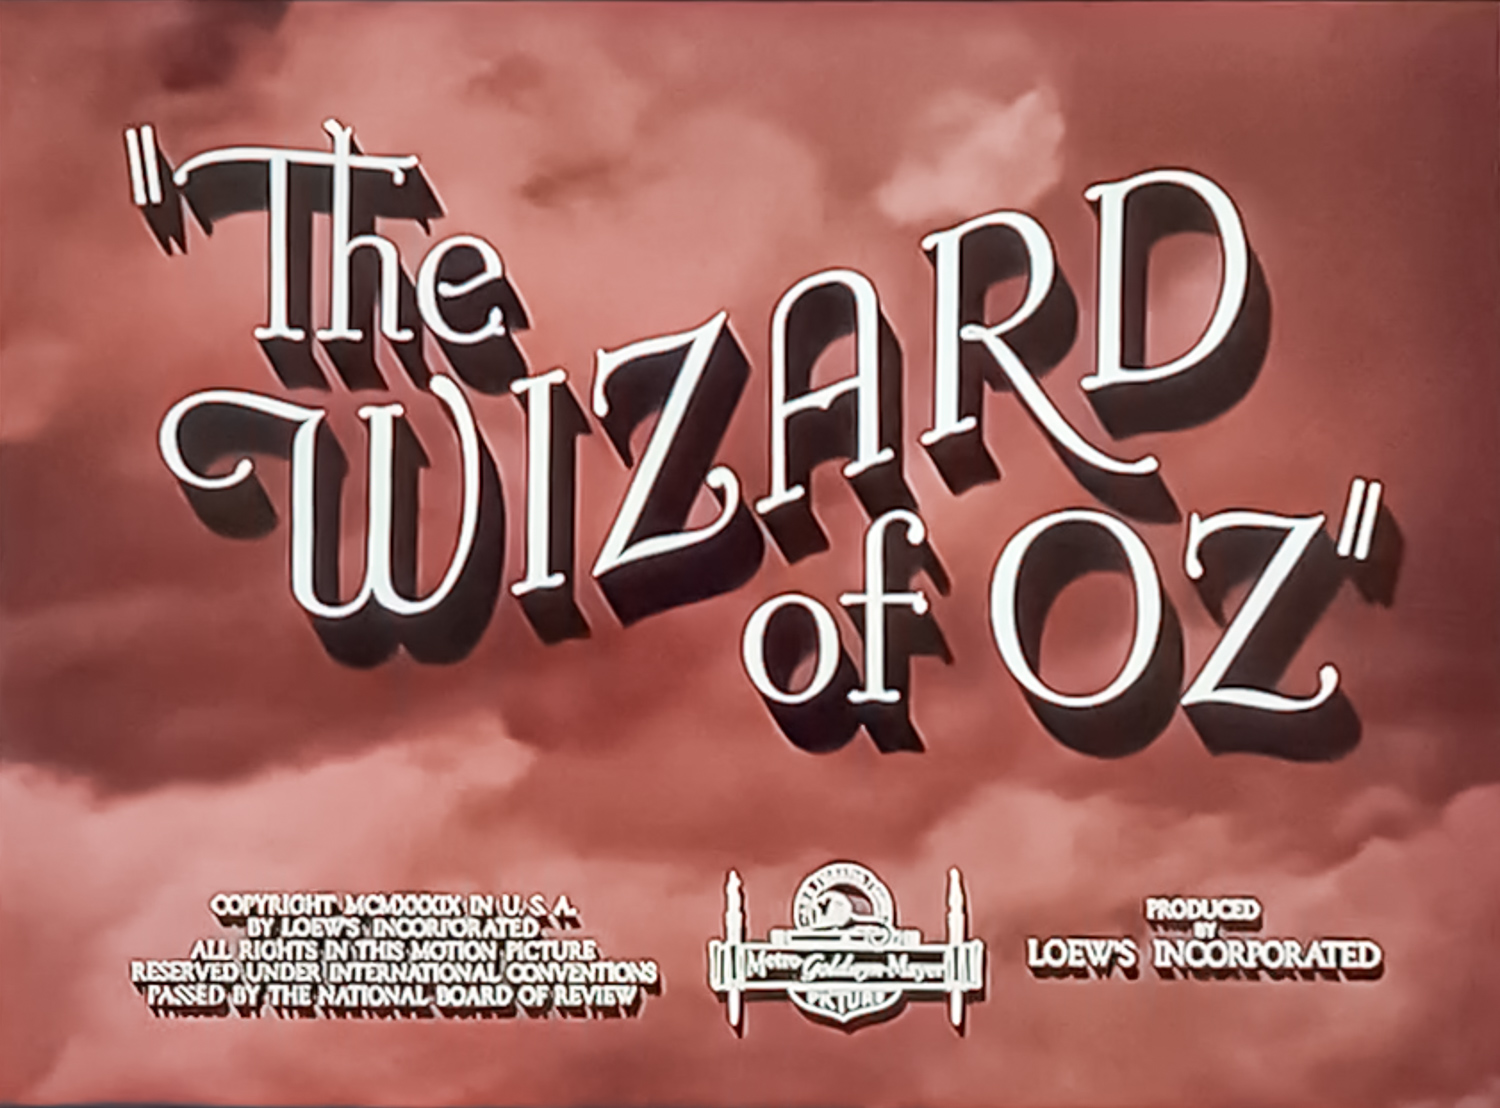 An old style toned photo of clouds with the text The Wizard of Oz in large capital letters